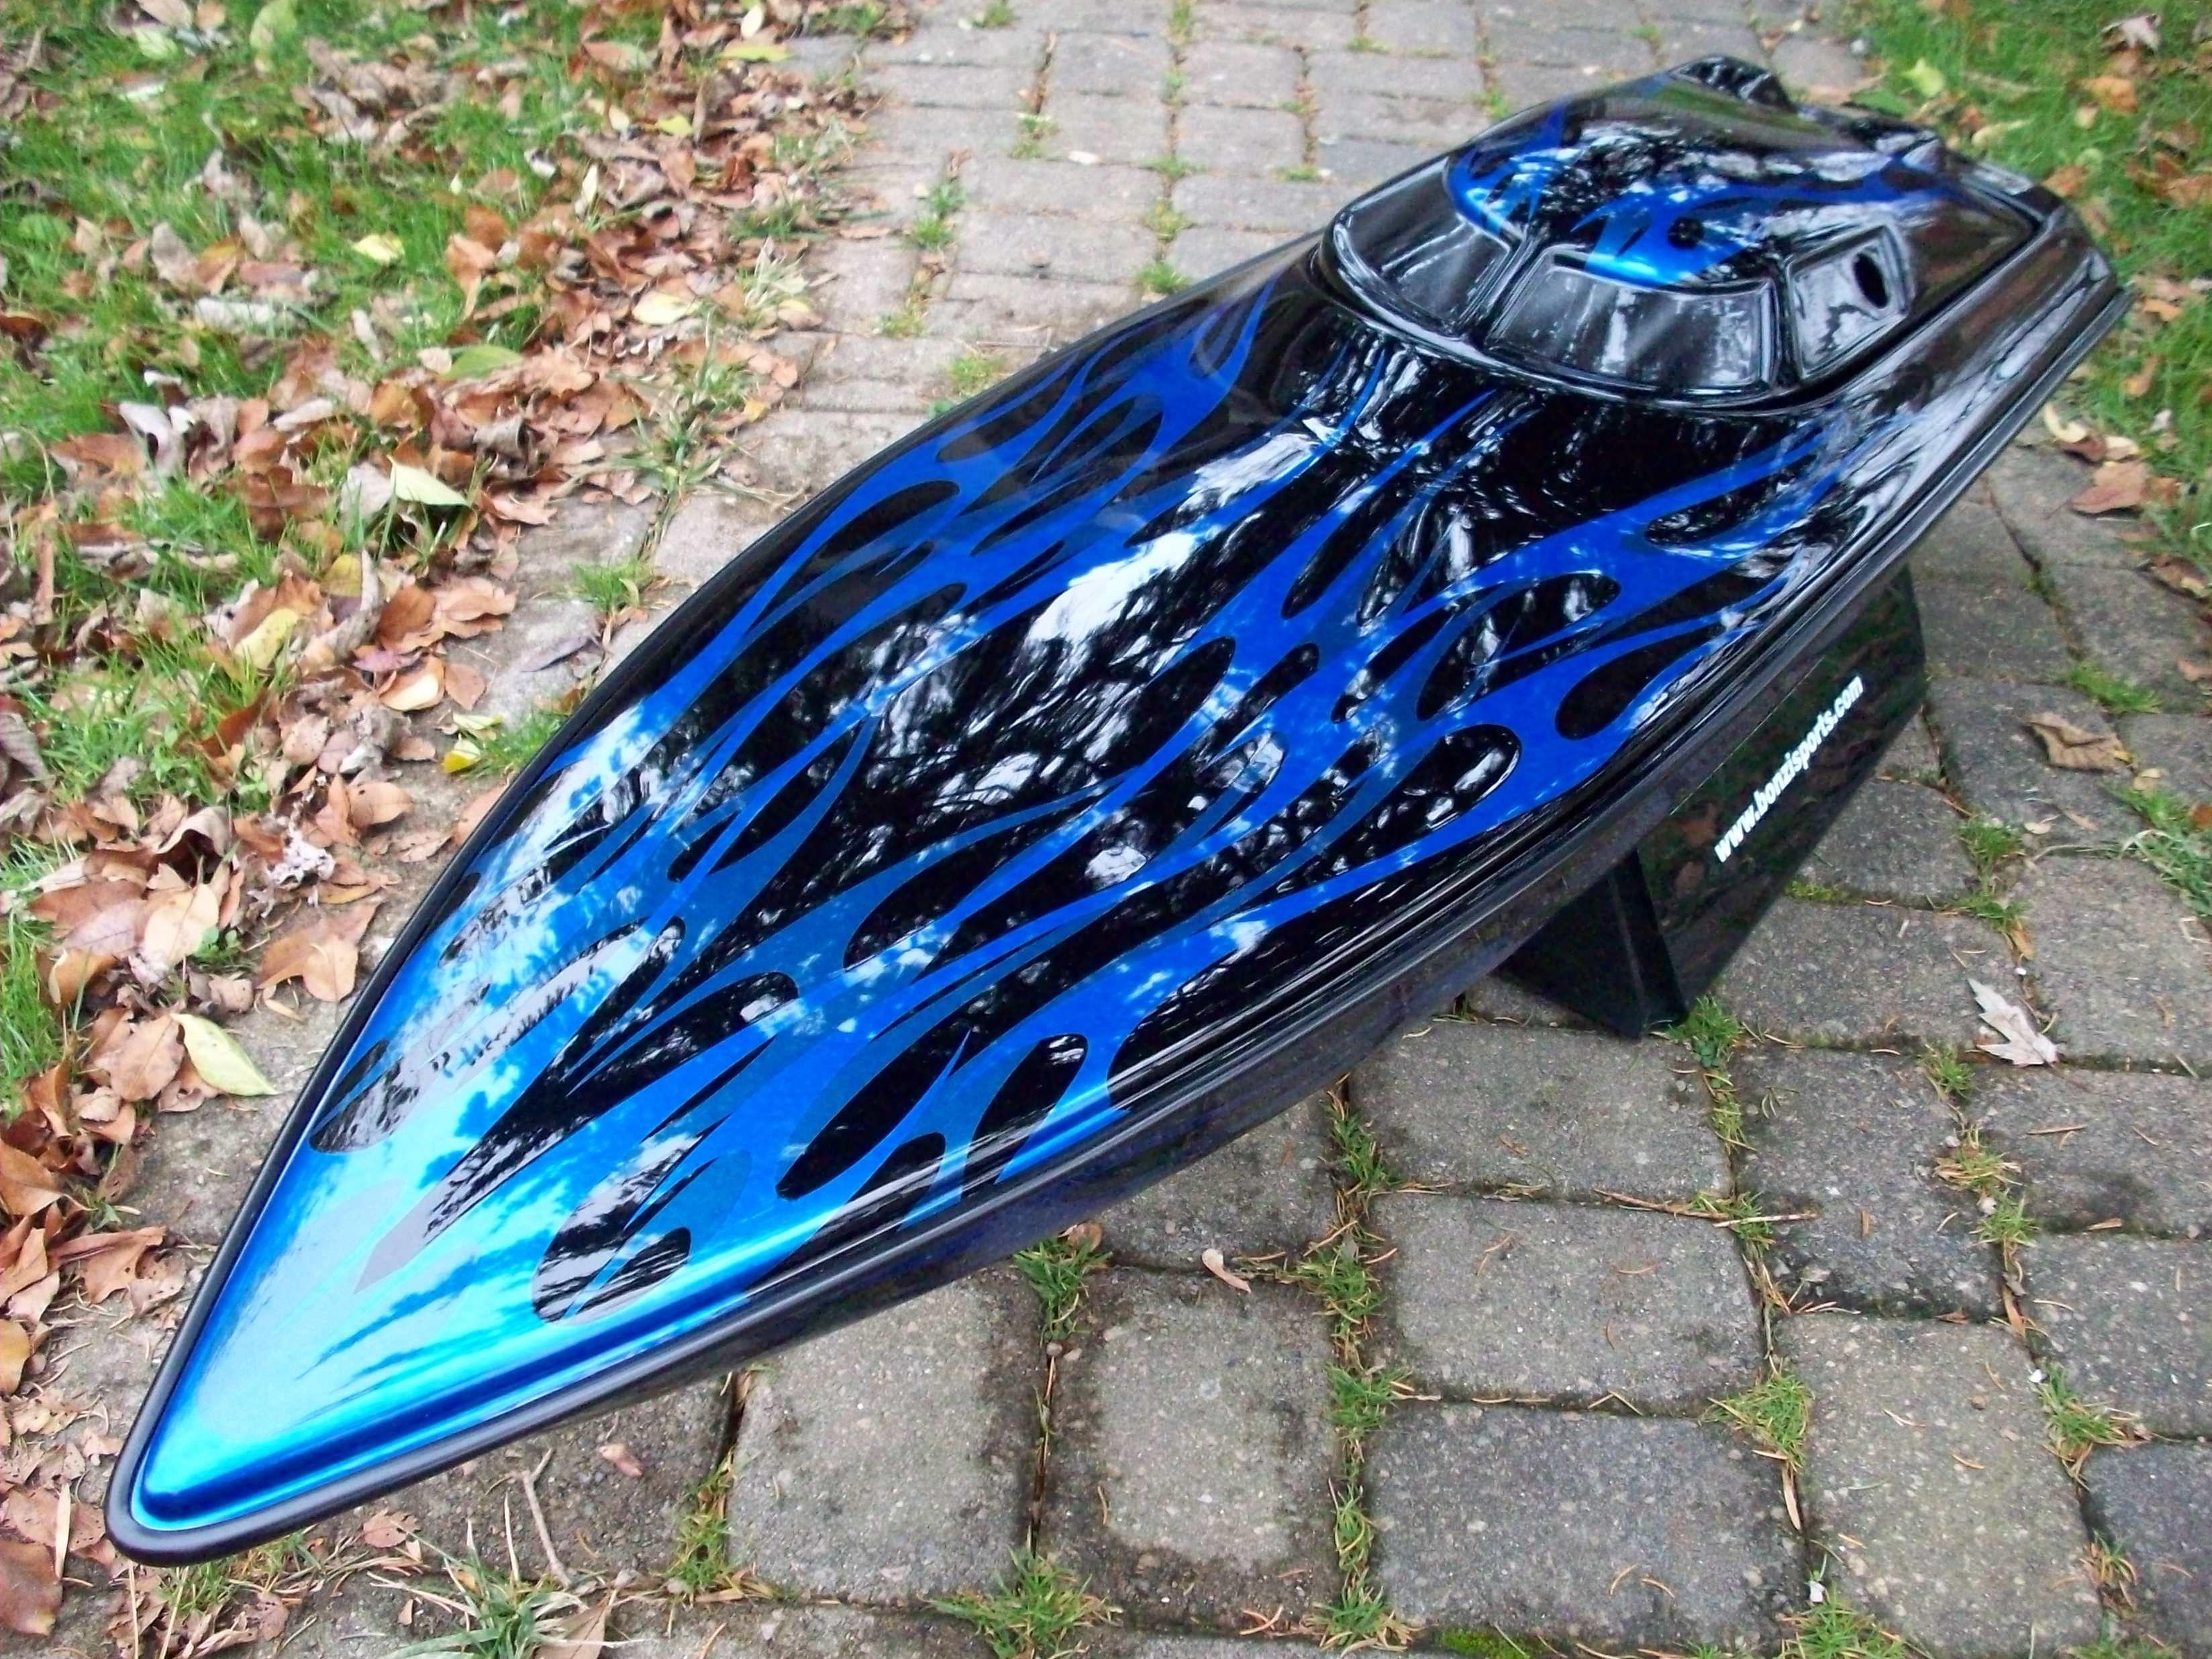 Rc Gas Jet Boat: Design and Components of RC Gas Jet Boats